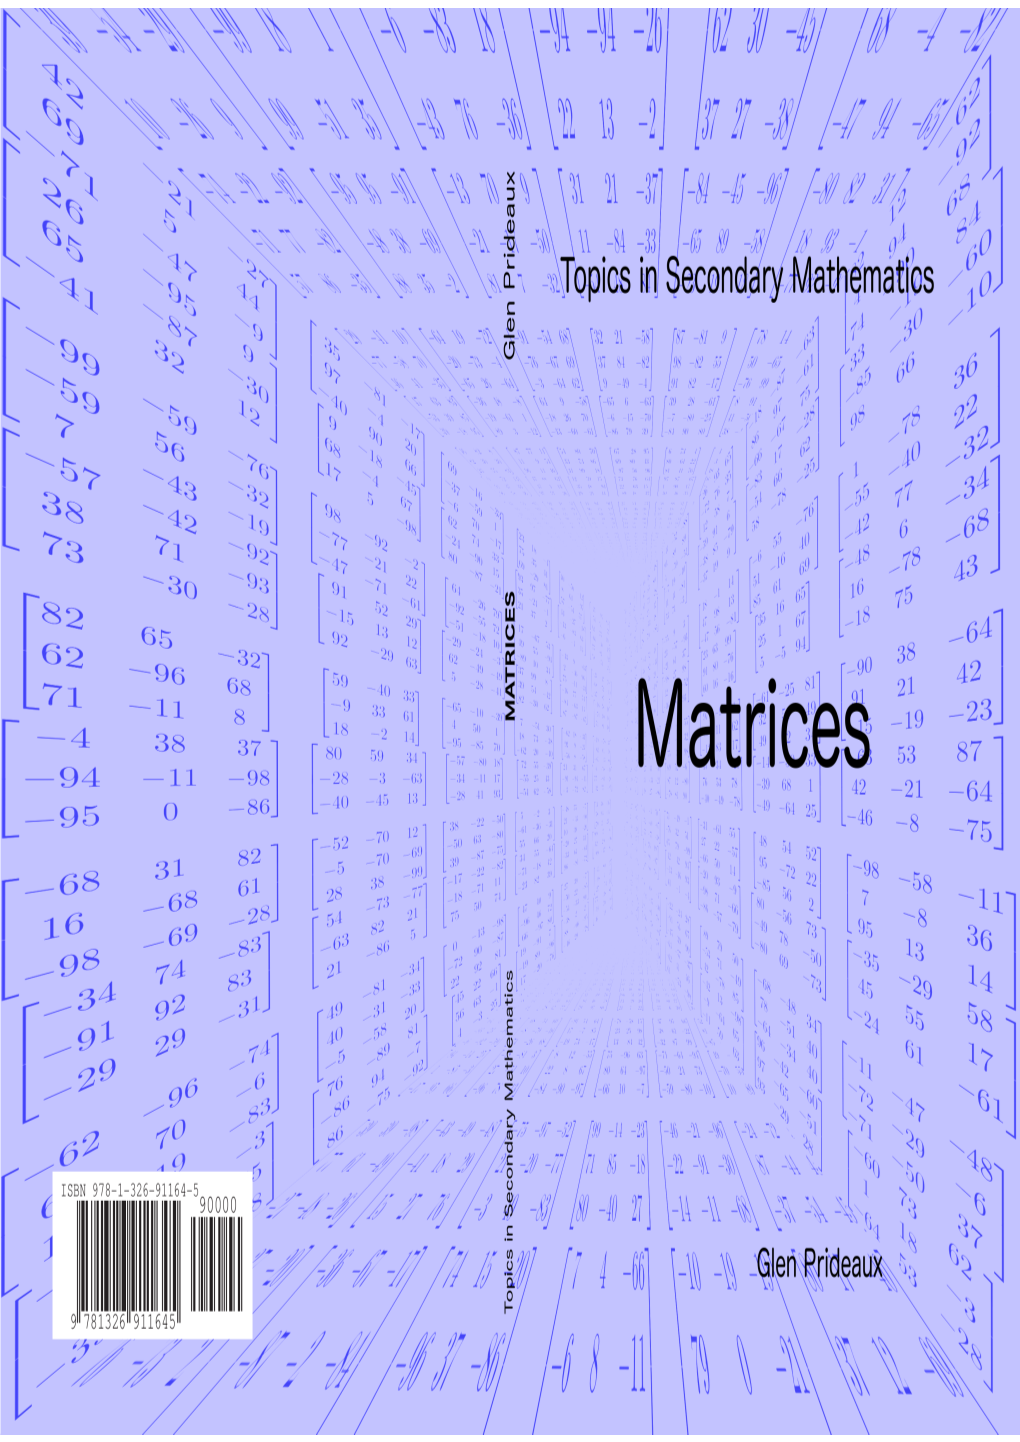 Matrices-With-Cover